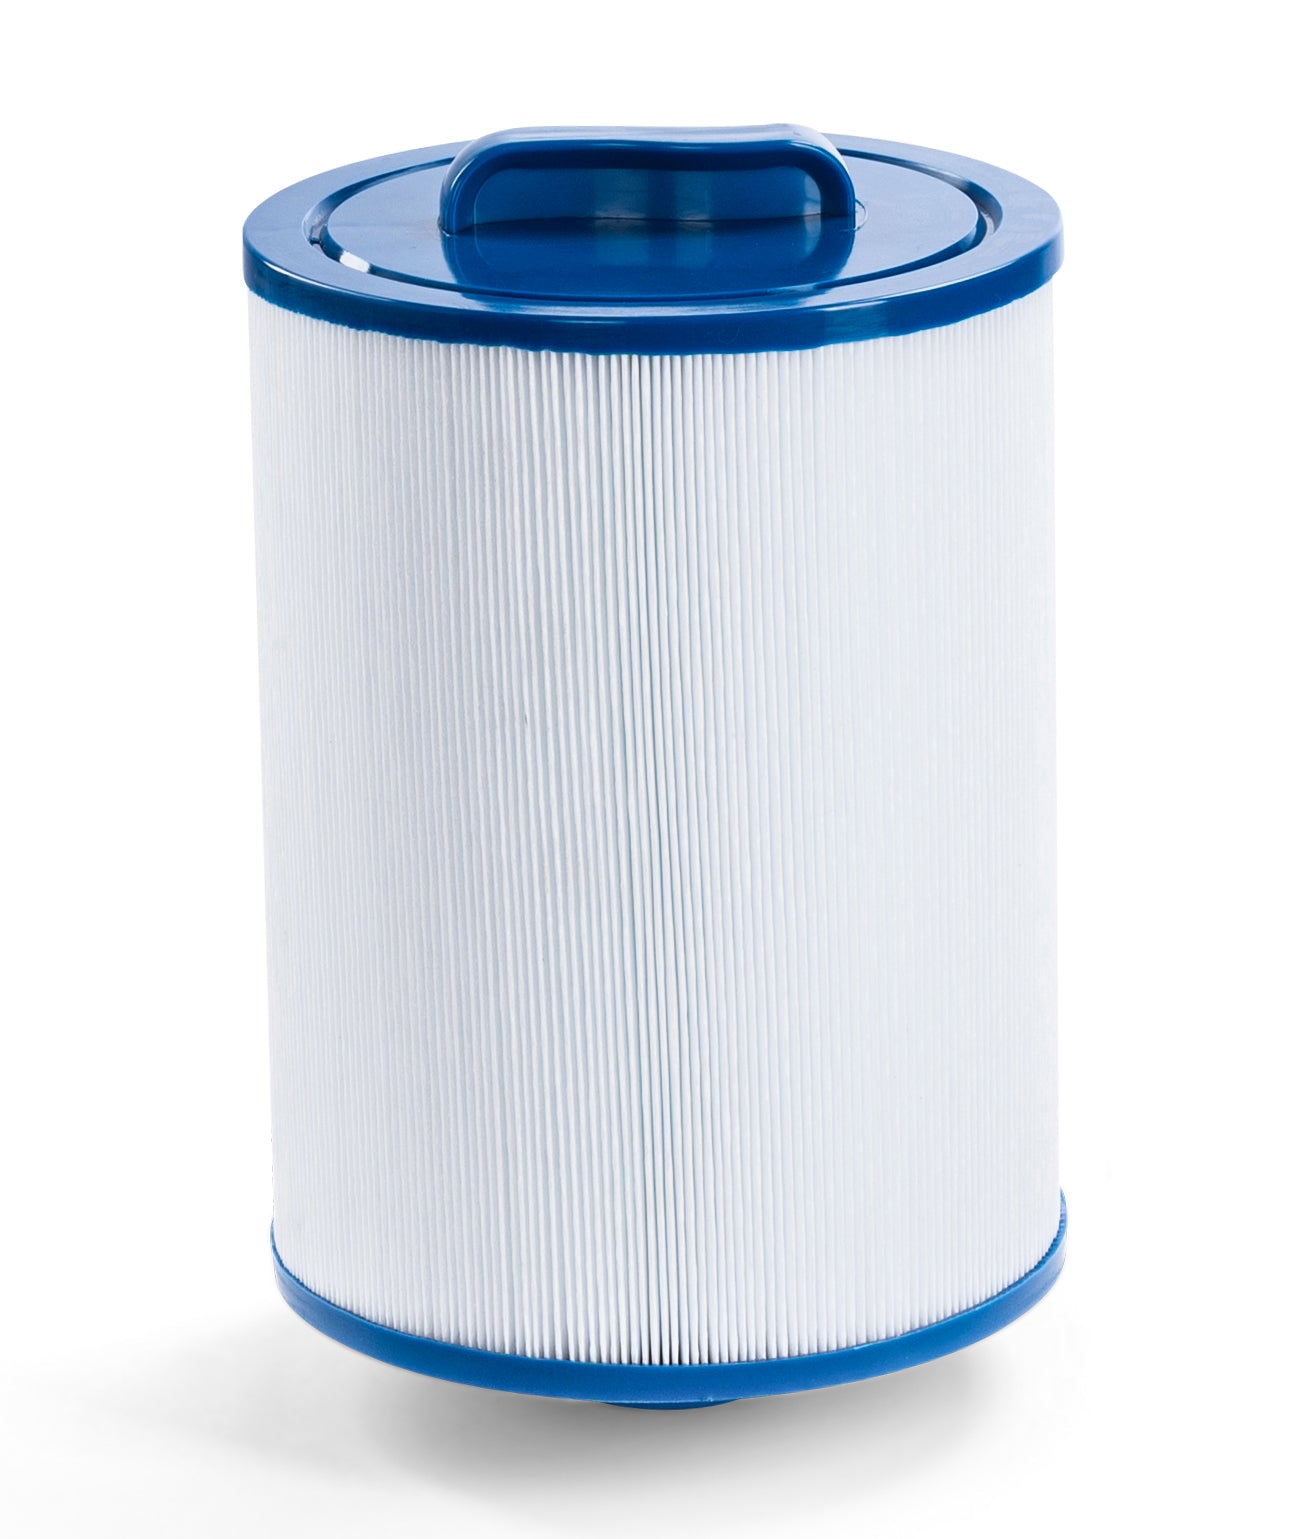 Pleatco PWW50P3, Unicel 6CH-940, Filbur FC-0359 Replacement Spa Filter –  Mist Filters